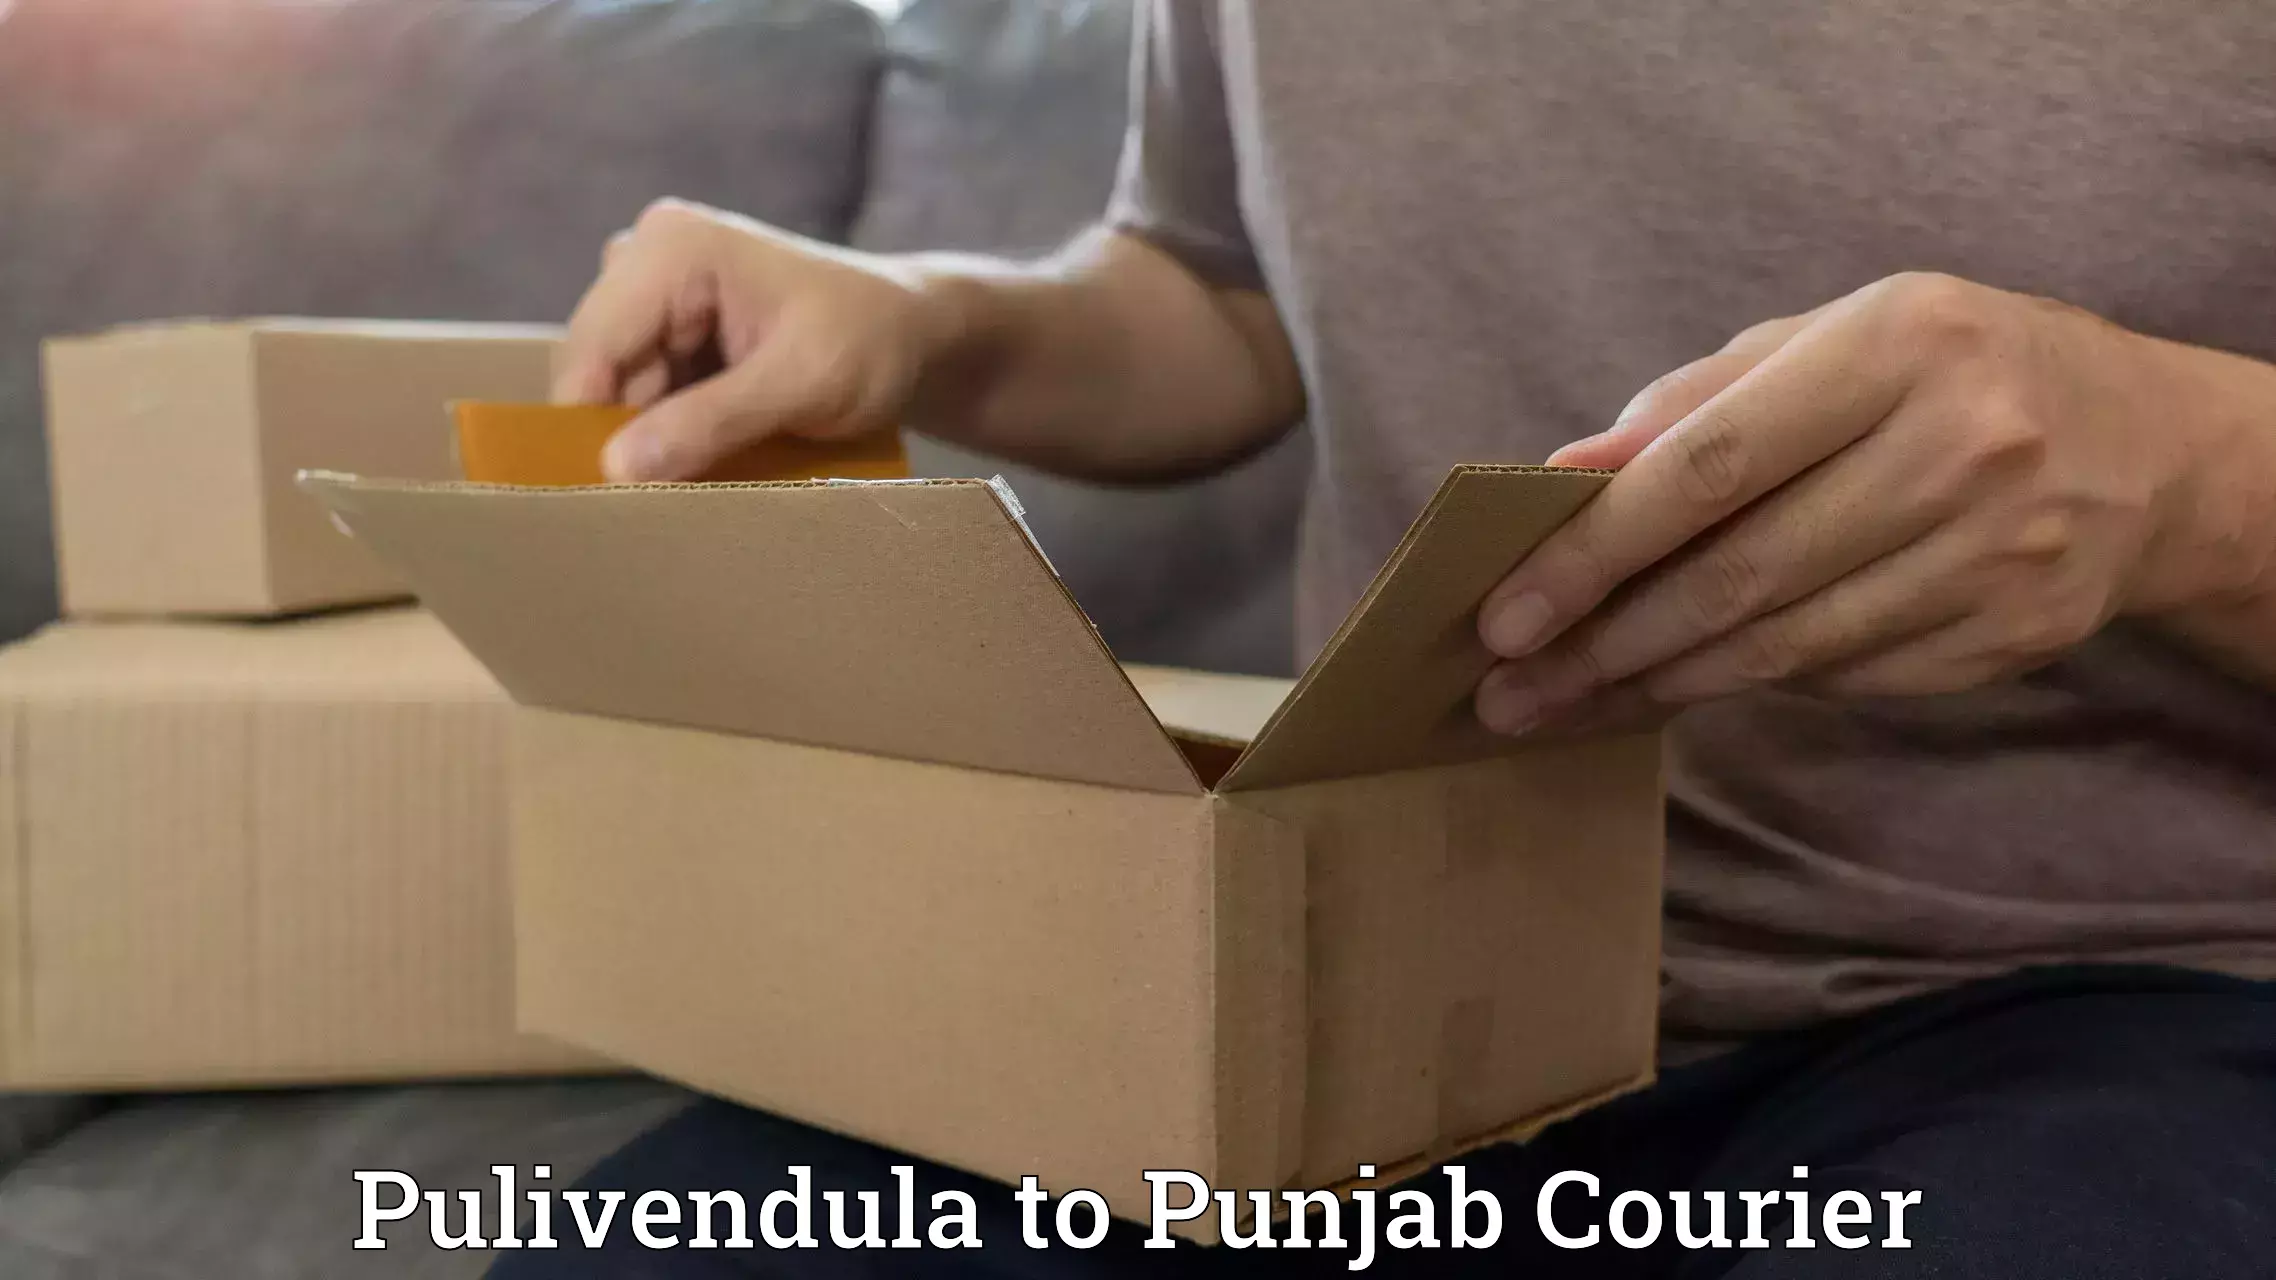 Expedited parcel delivery in Pulivendula to Tarn Taran Sahib